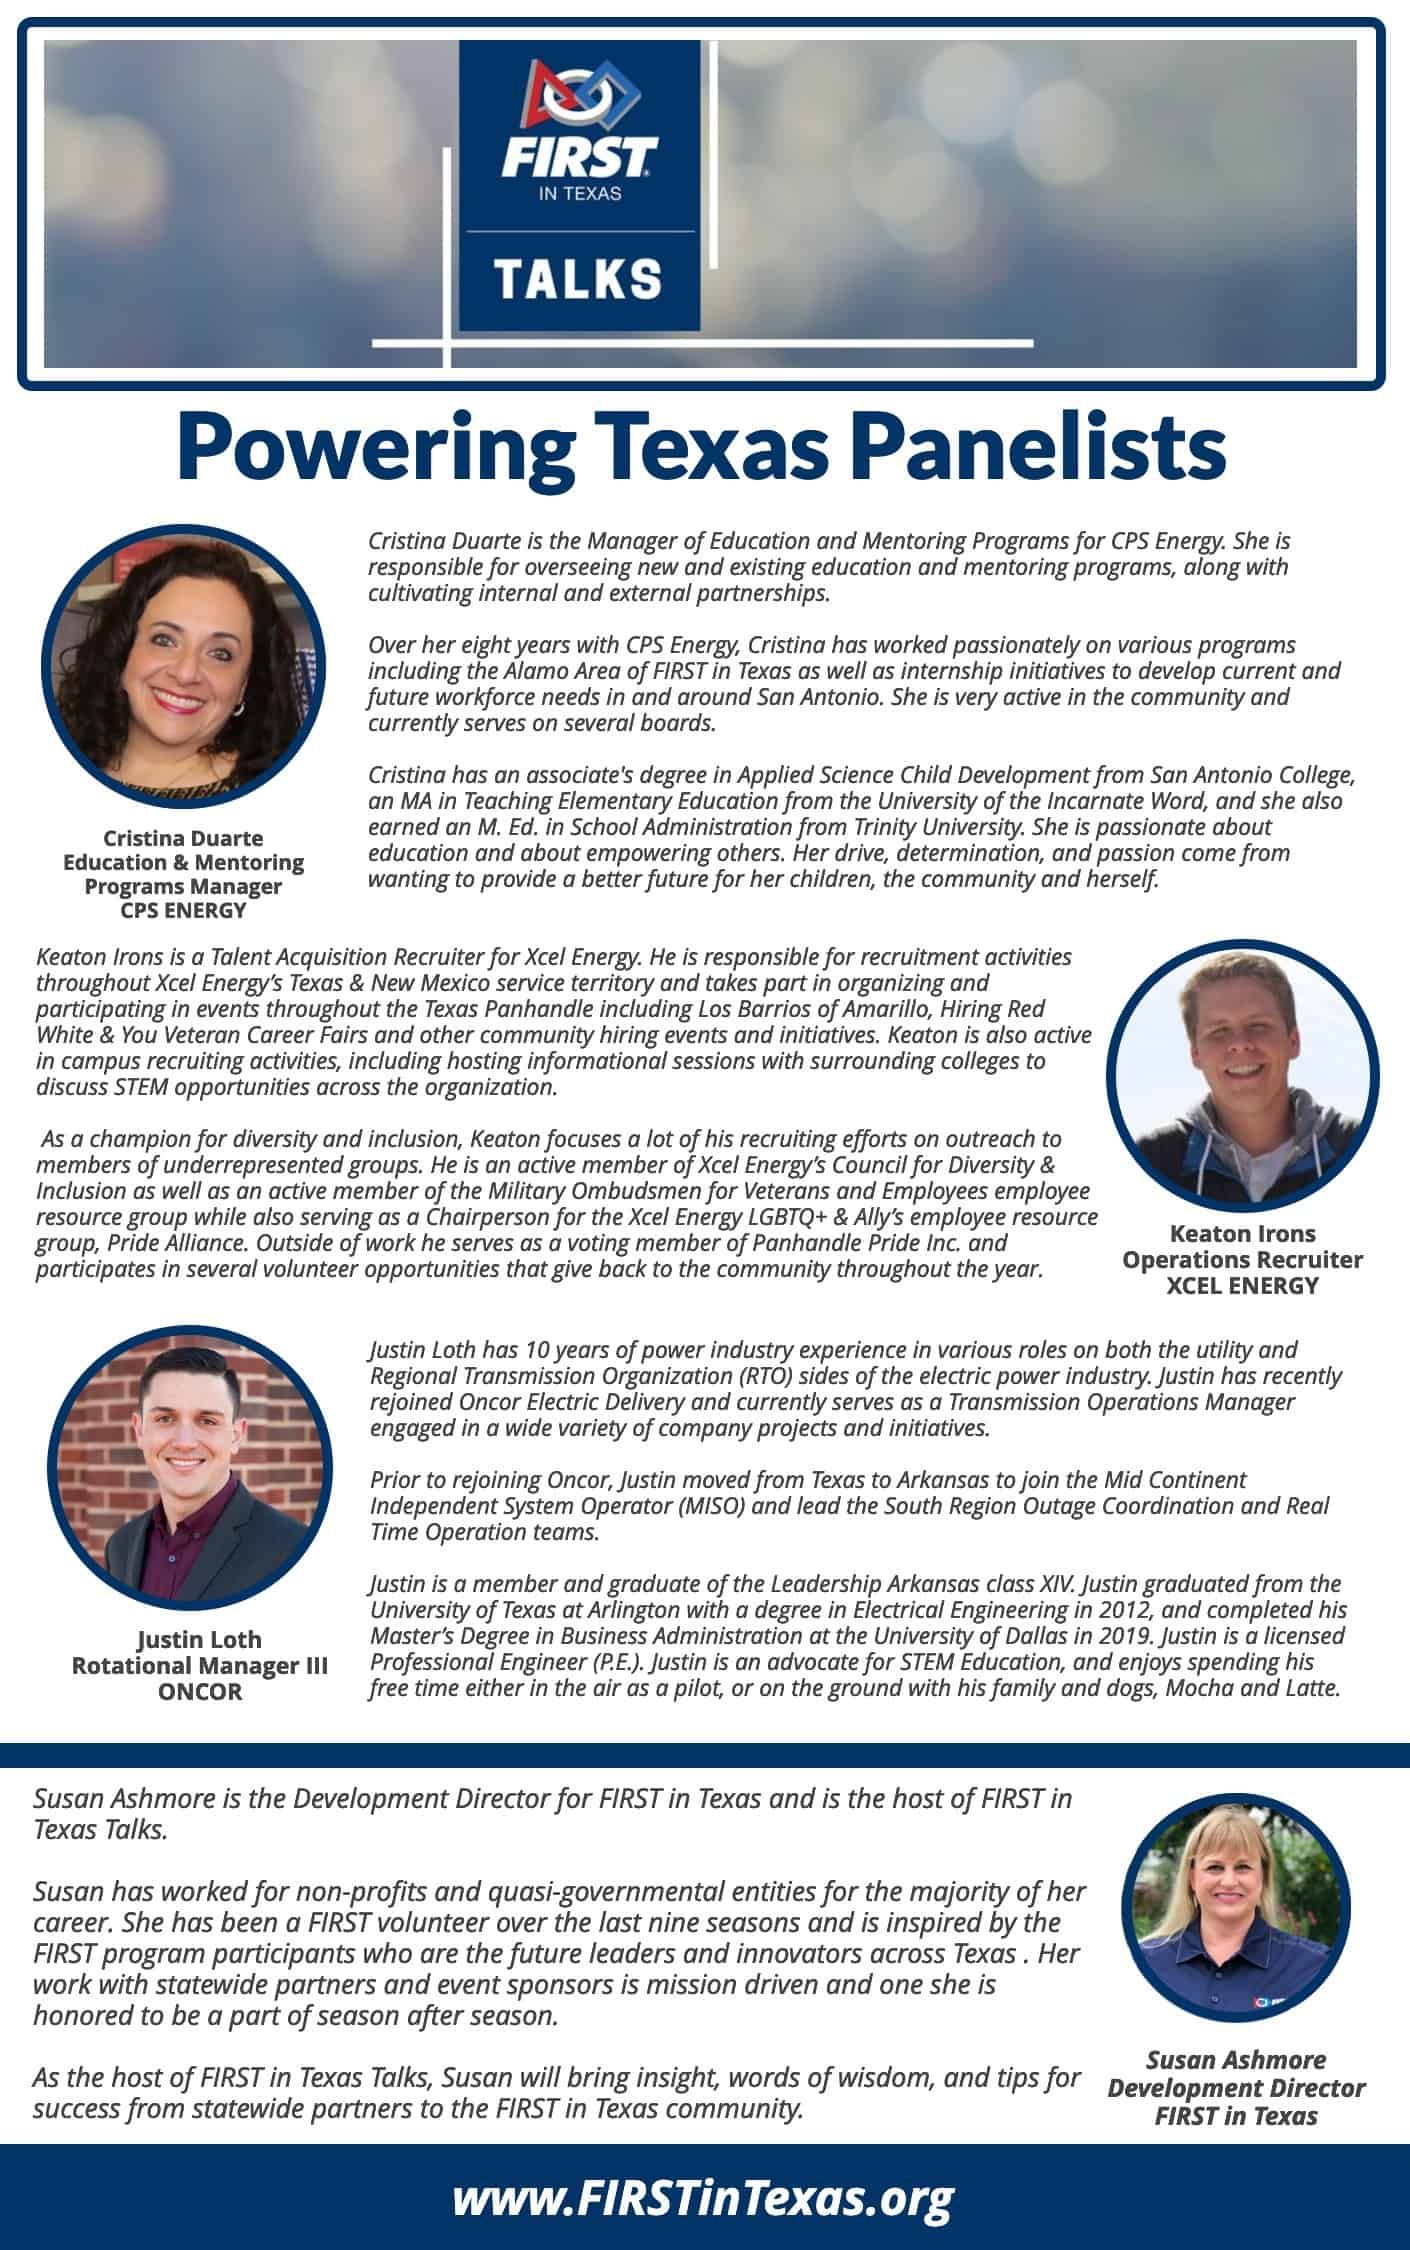 FIRST in Texas Talks Panelist Program - Cristina Duarte of CPS Energy Keaton Irons of Xcel Energy Justin Loth of Oncor